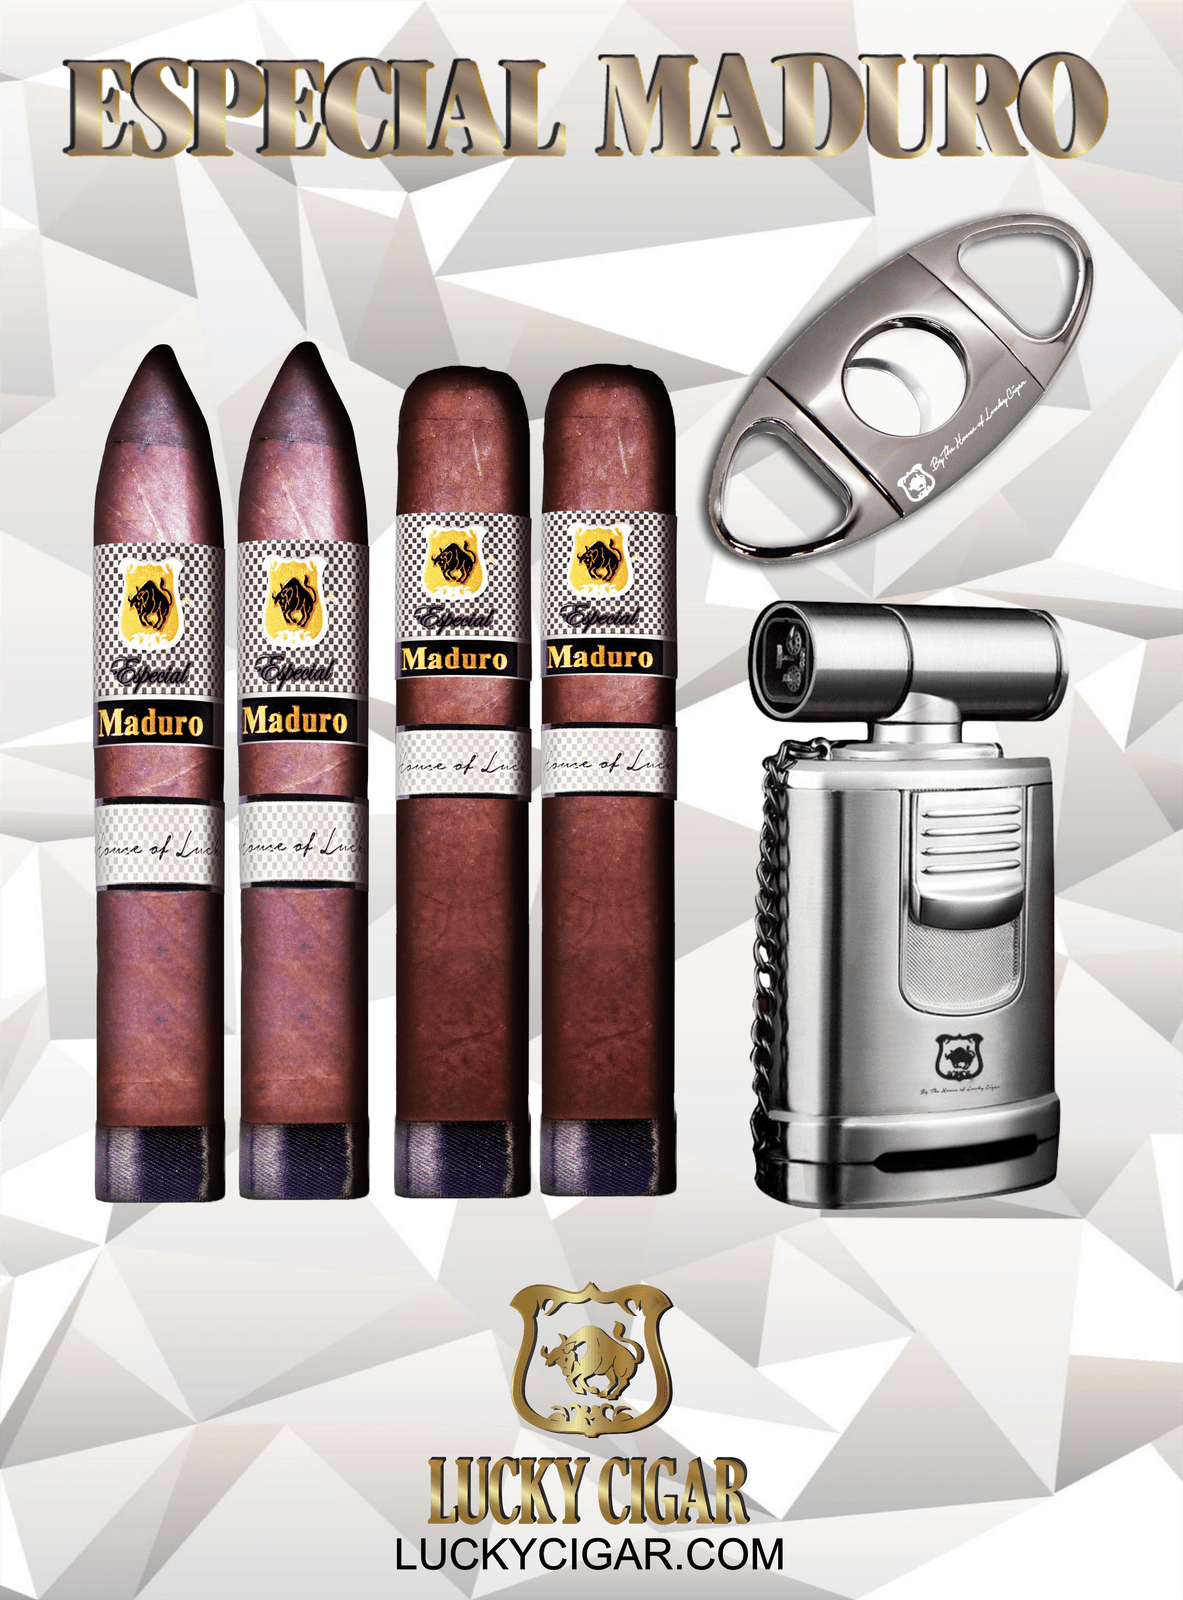 Maduro Cigars: Especial Maduro by Lucky Cigar: Set of 4 Cigars, 2 Toro, 2 Torpedo with Cutter, Torch